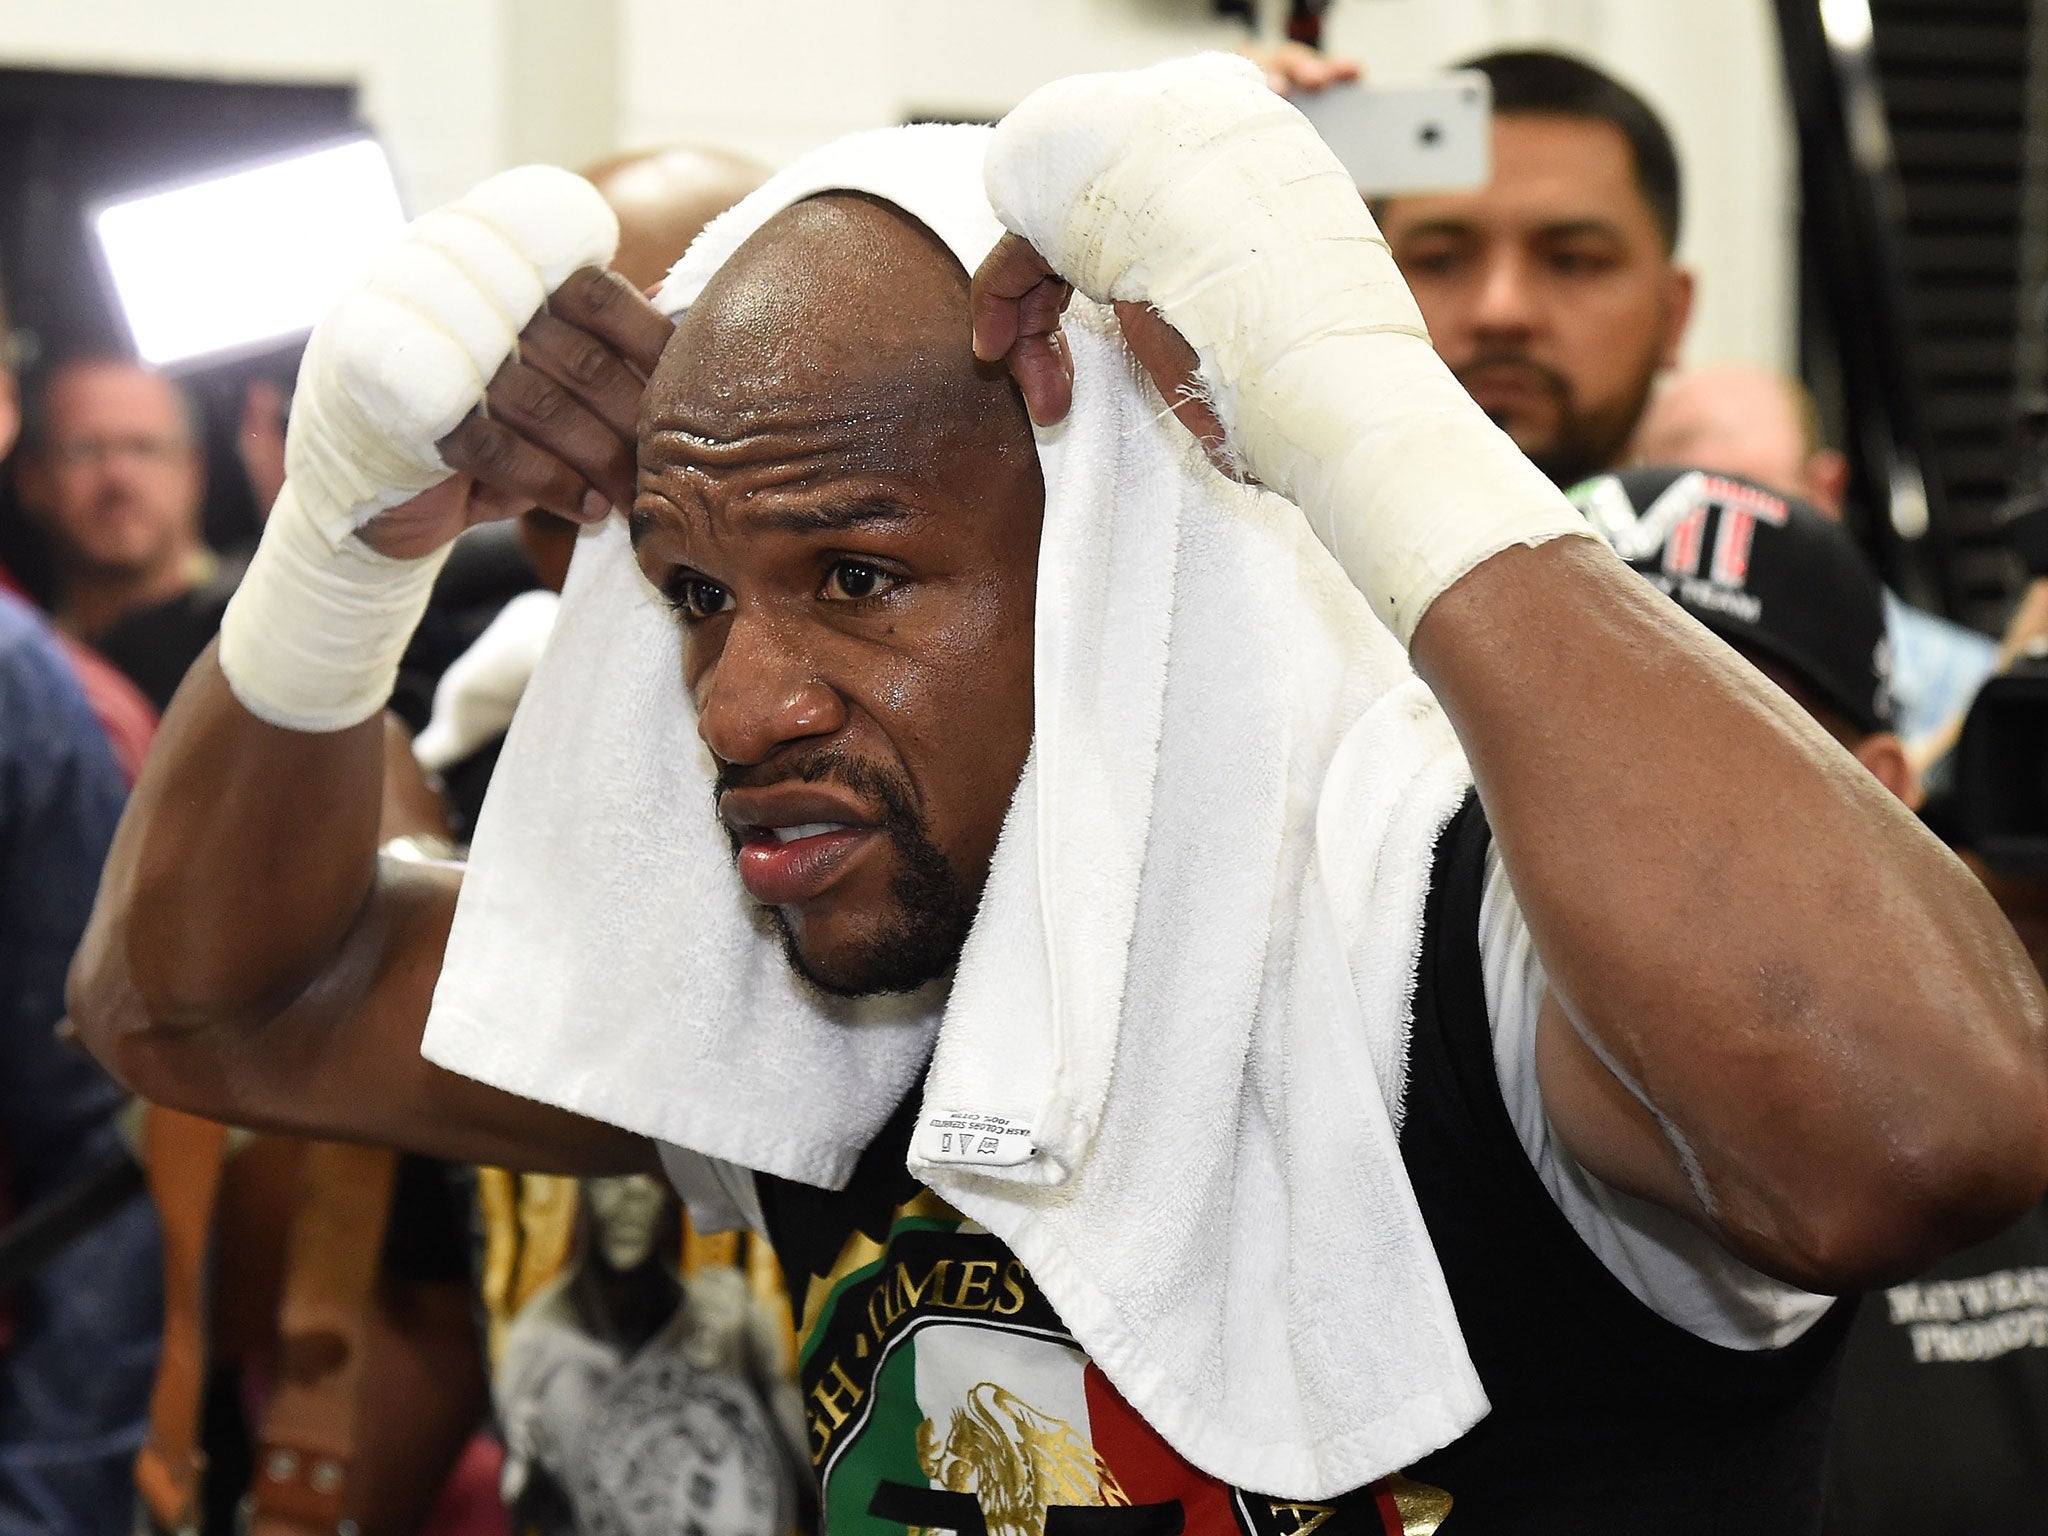 Floyd Mayweather, 38, has hinted at retirement